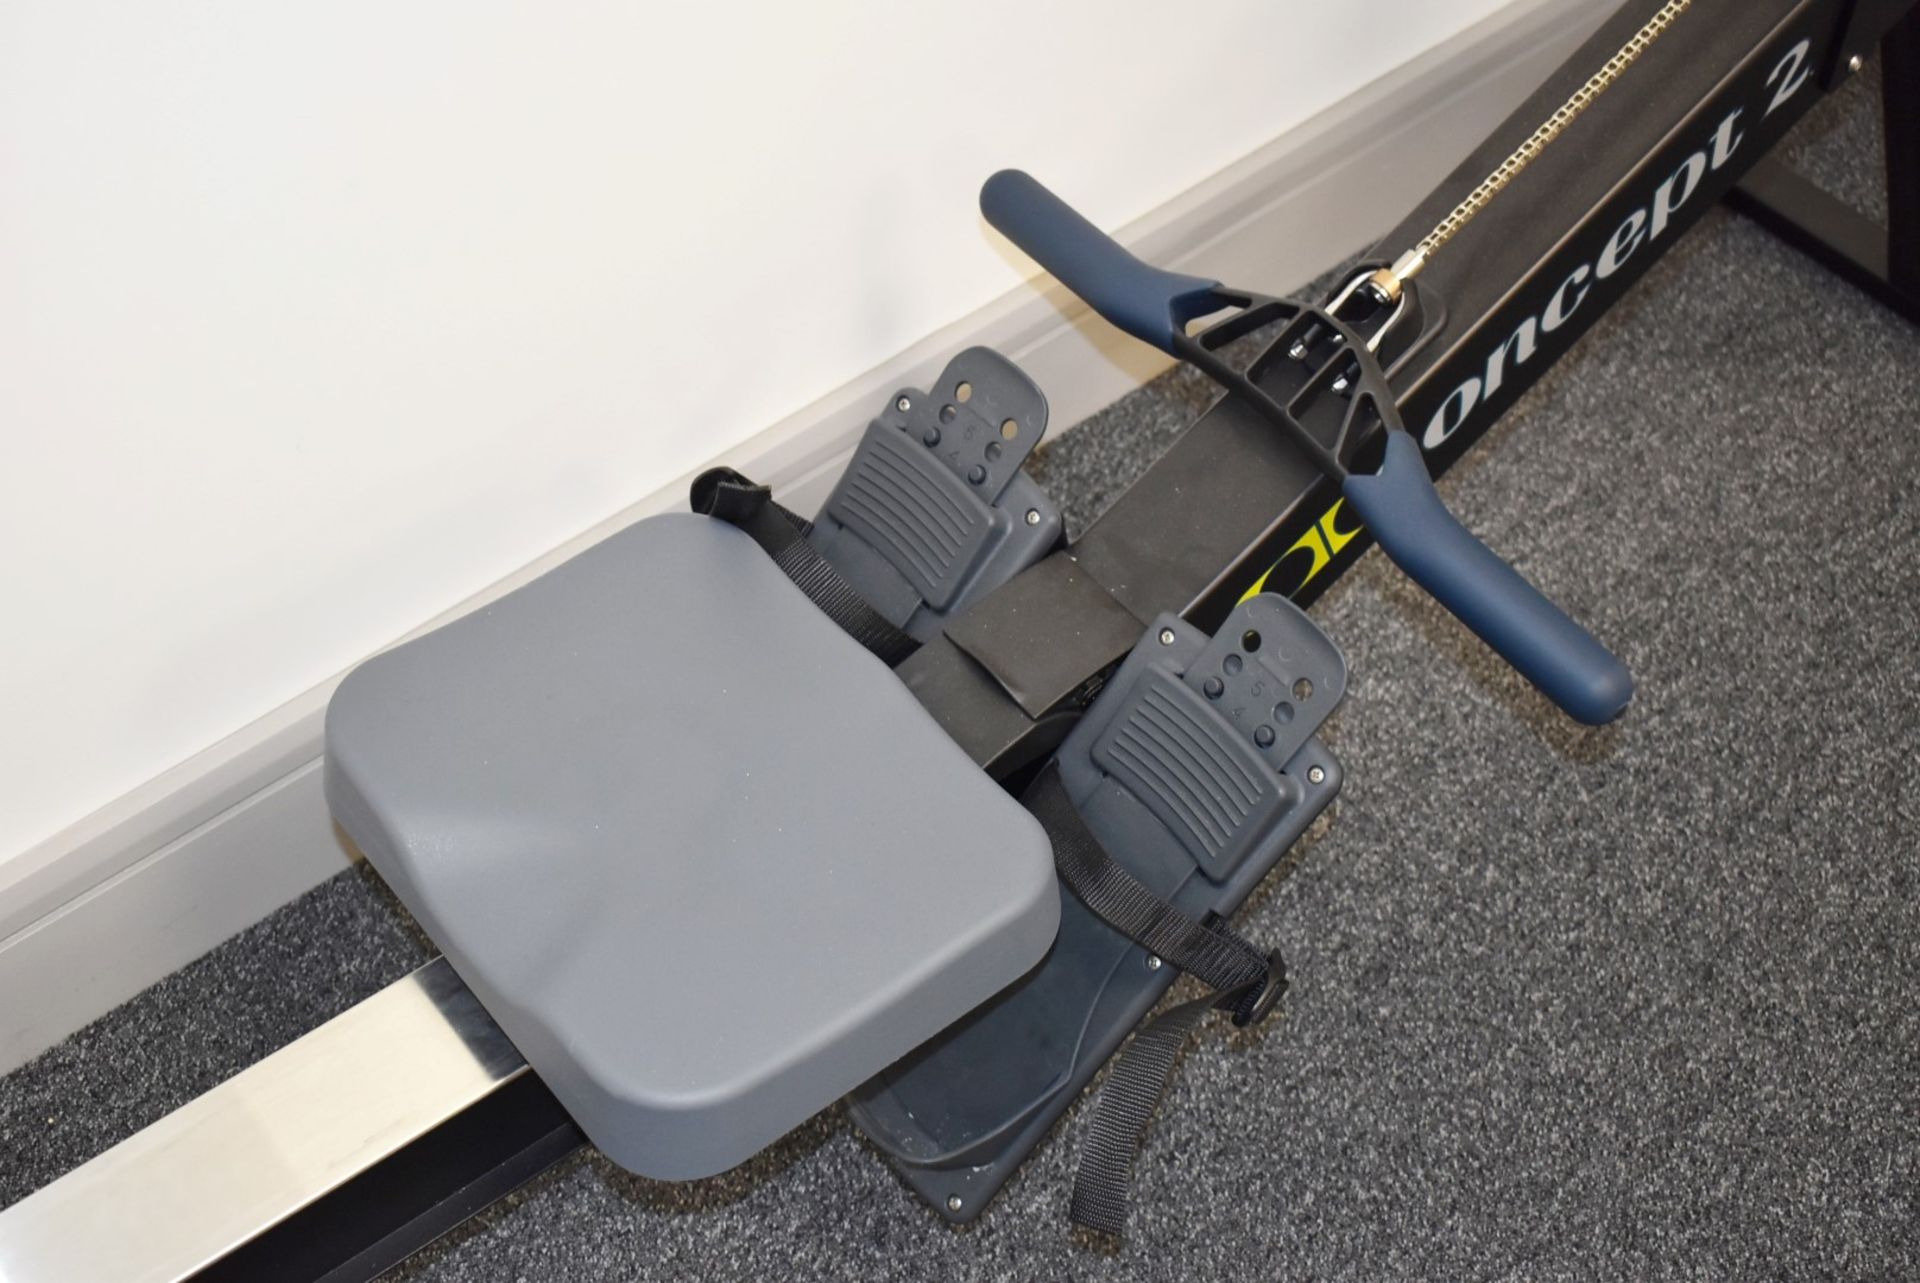 1 x Concept 2 RowErg Rowing Machine With PM5 Monitor - Image 5 of 8